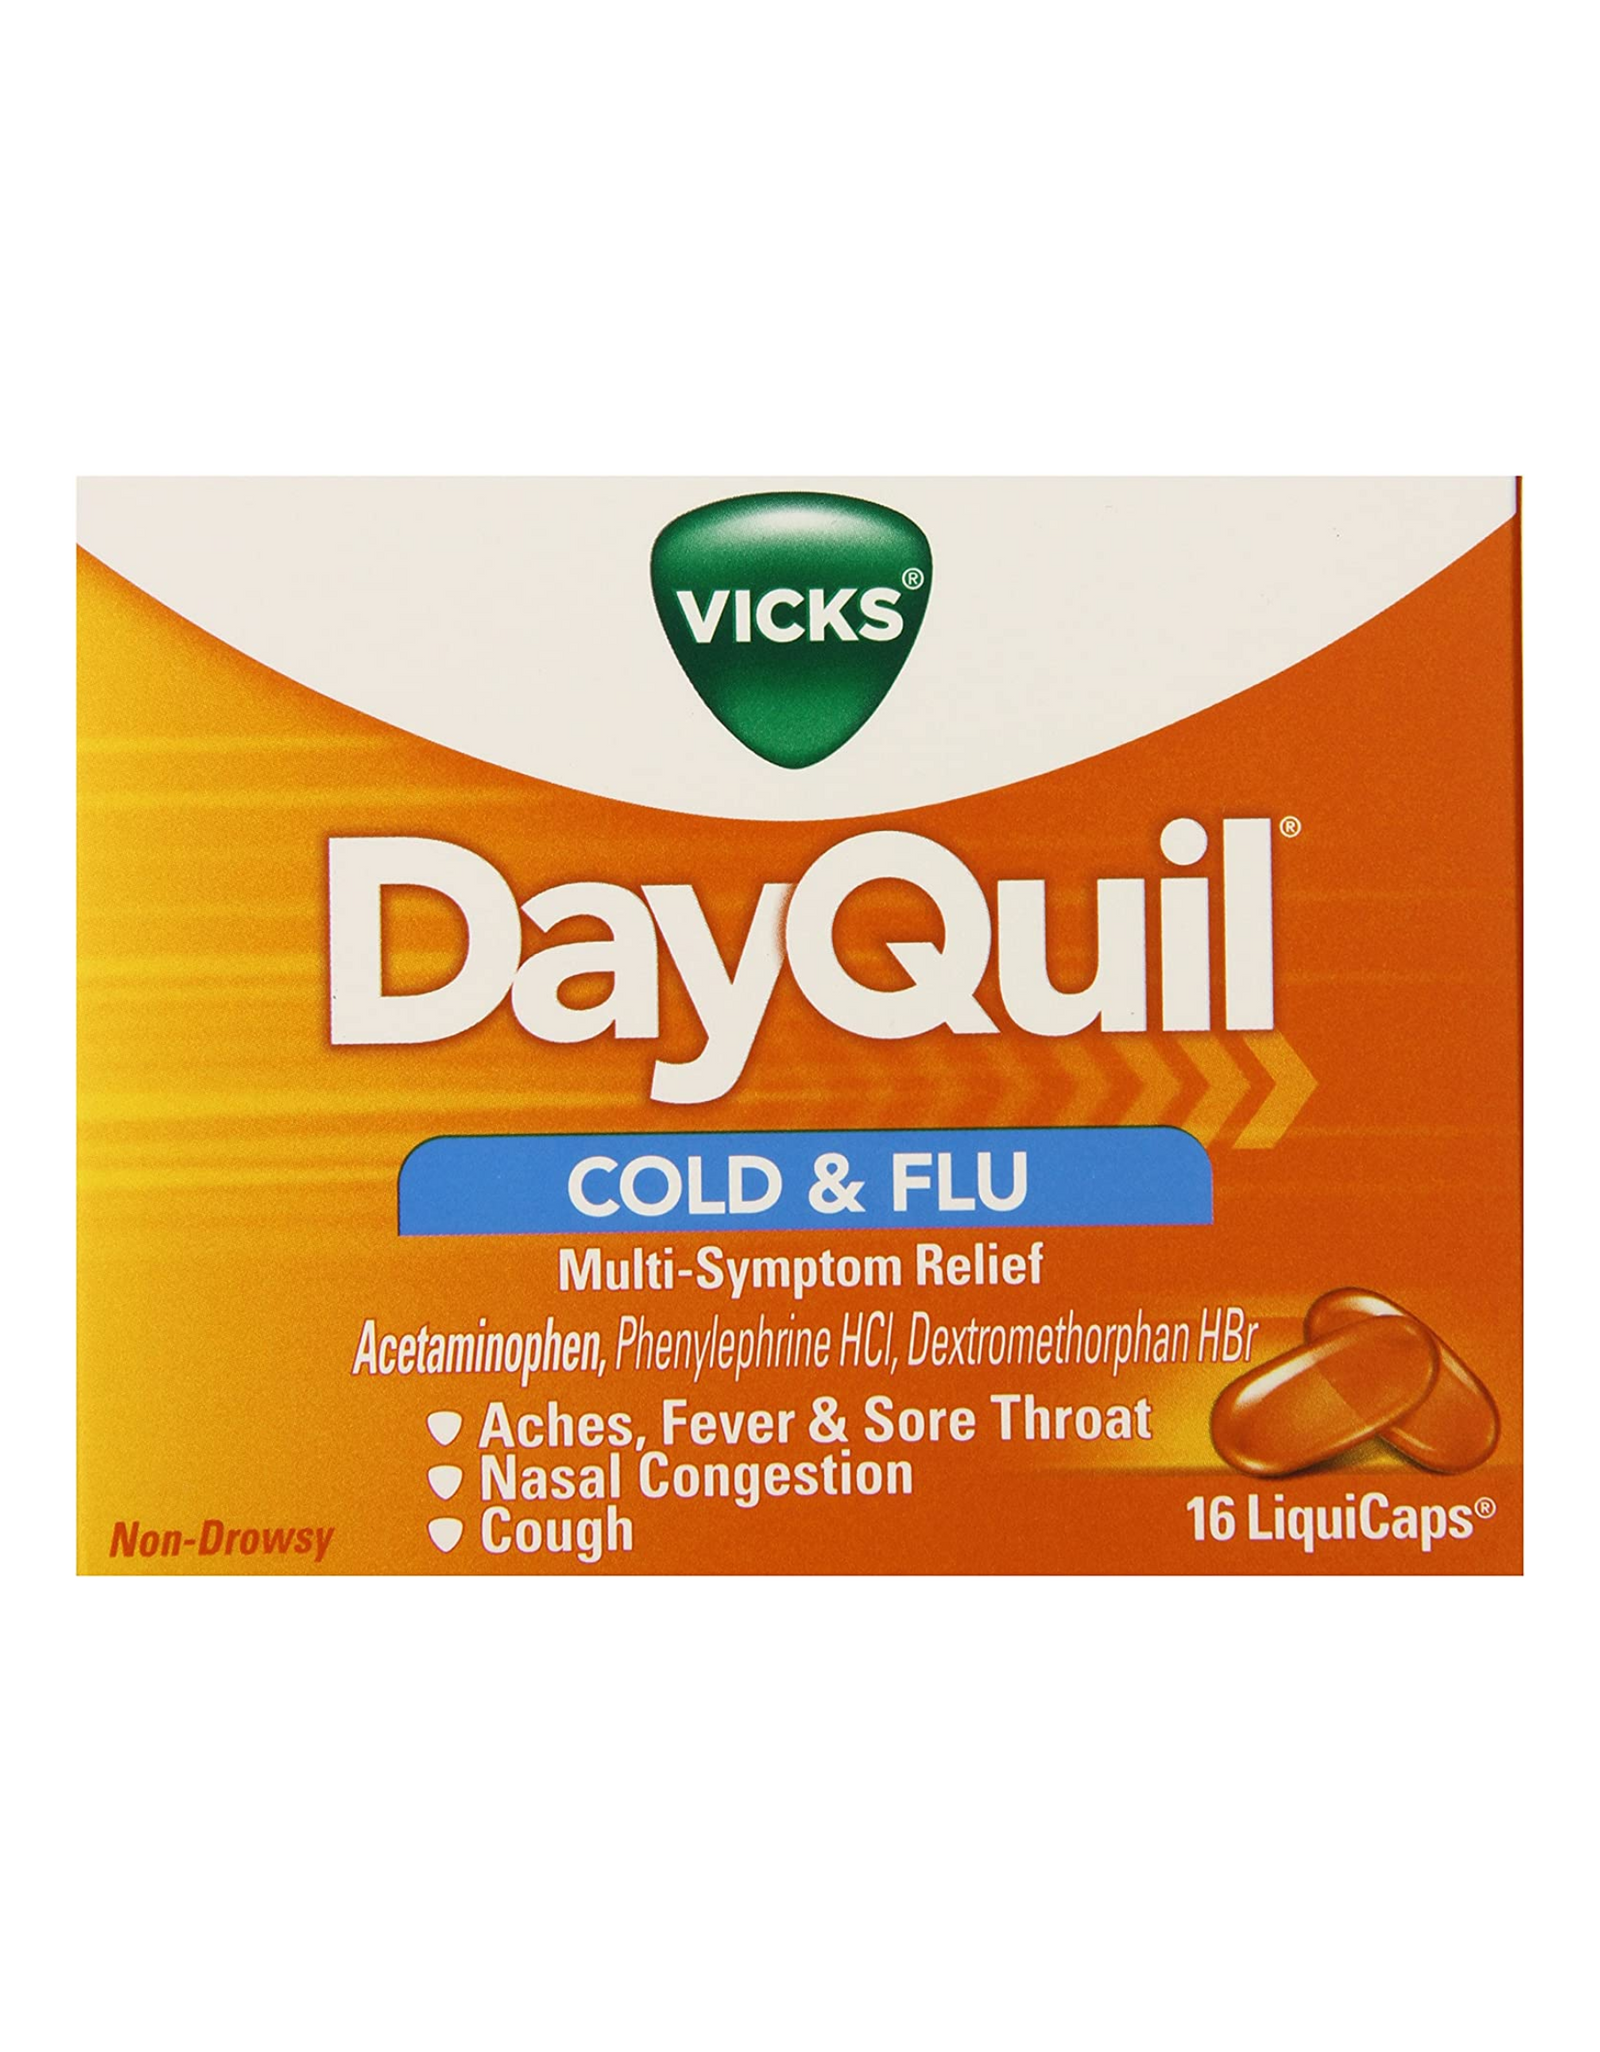 Dayquil Cold & Flu Multi-Symptom Relief, 16 CT